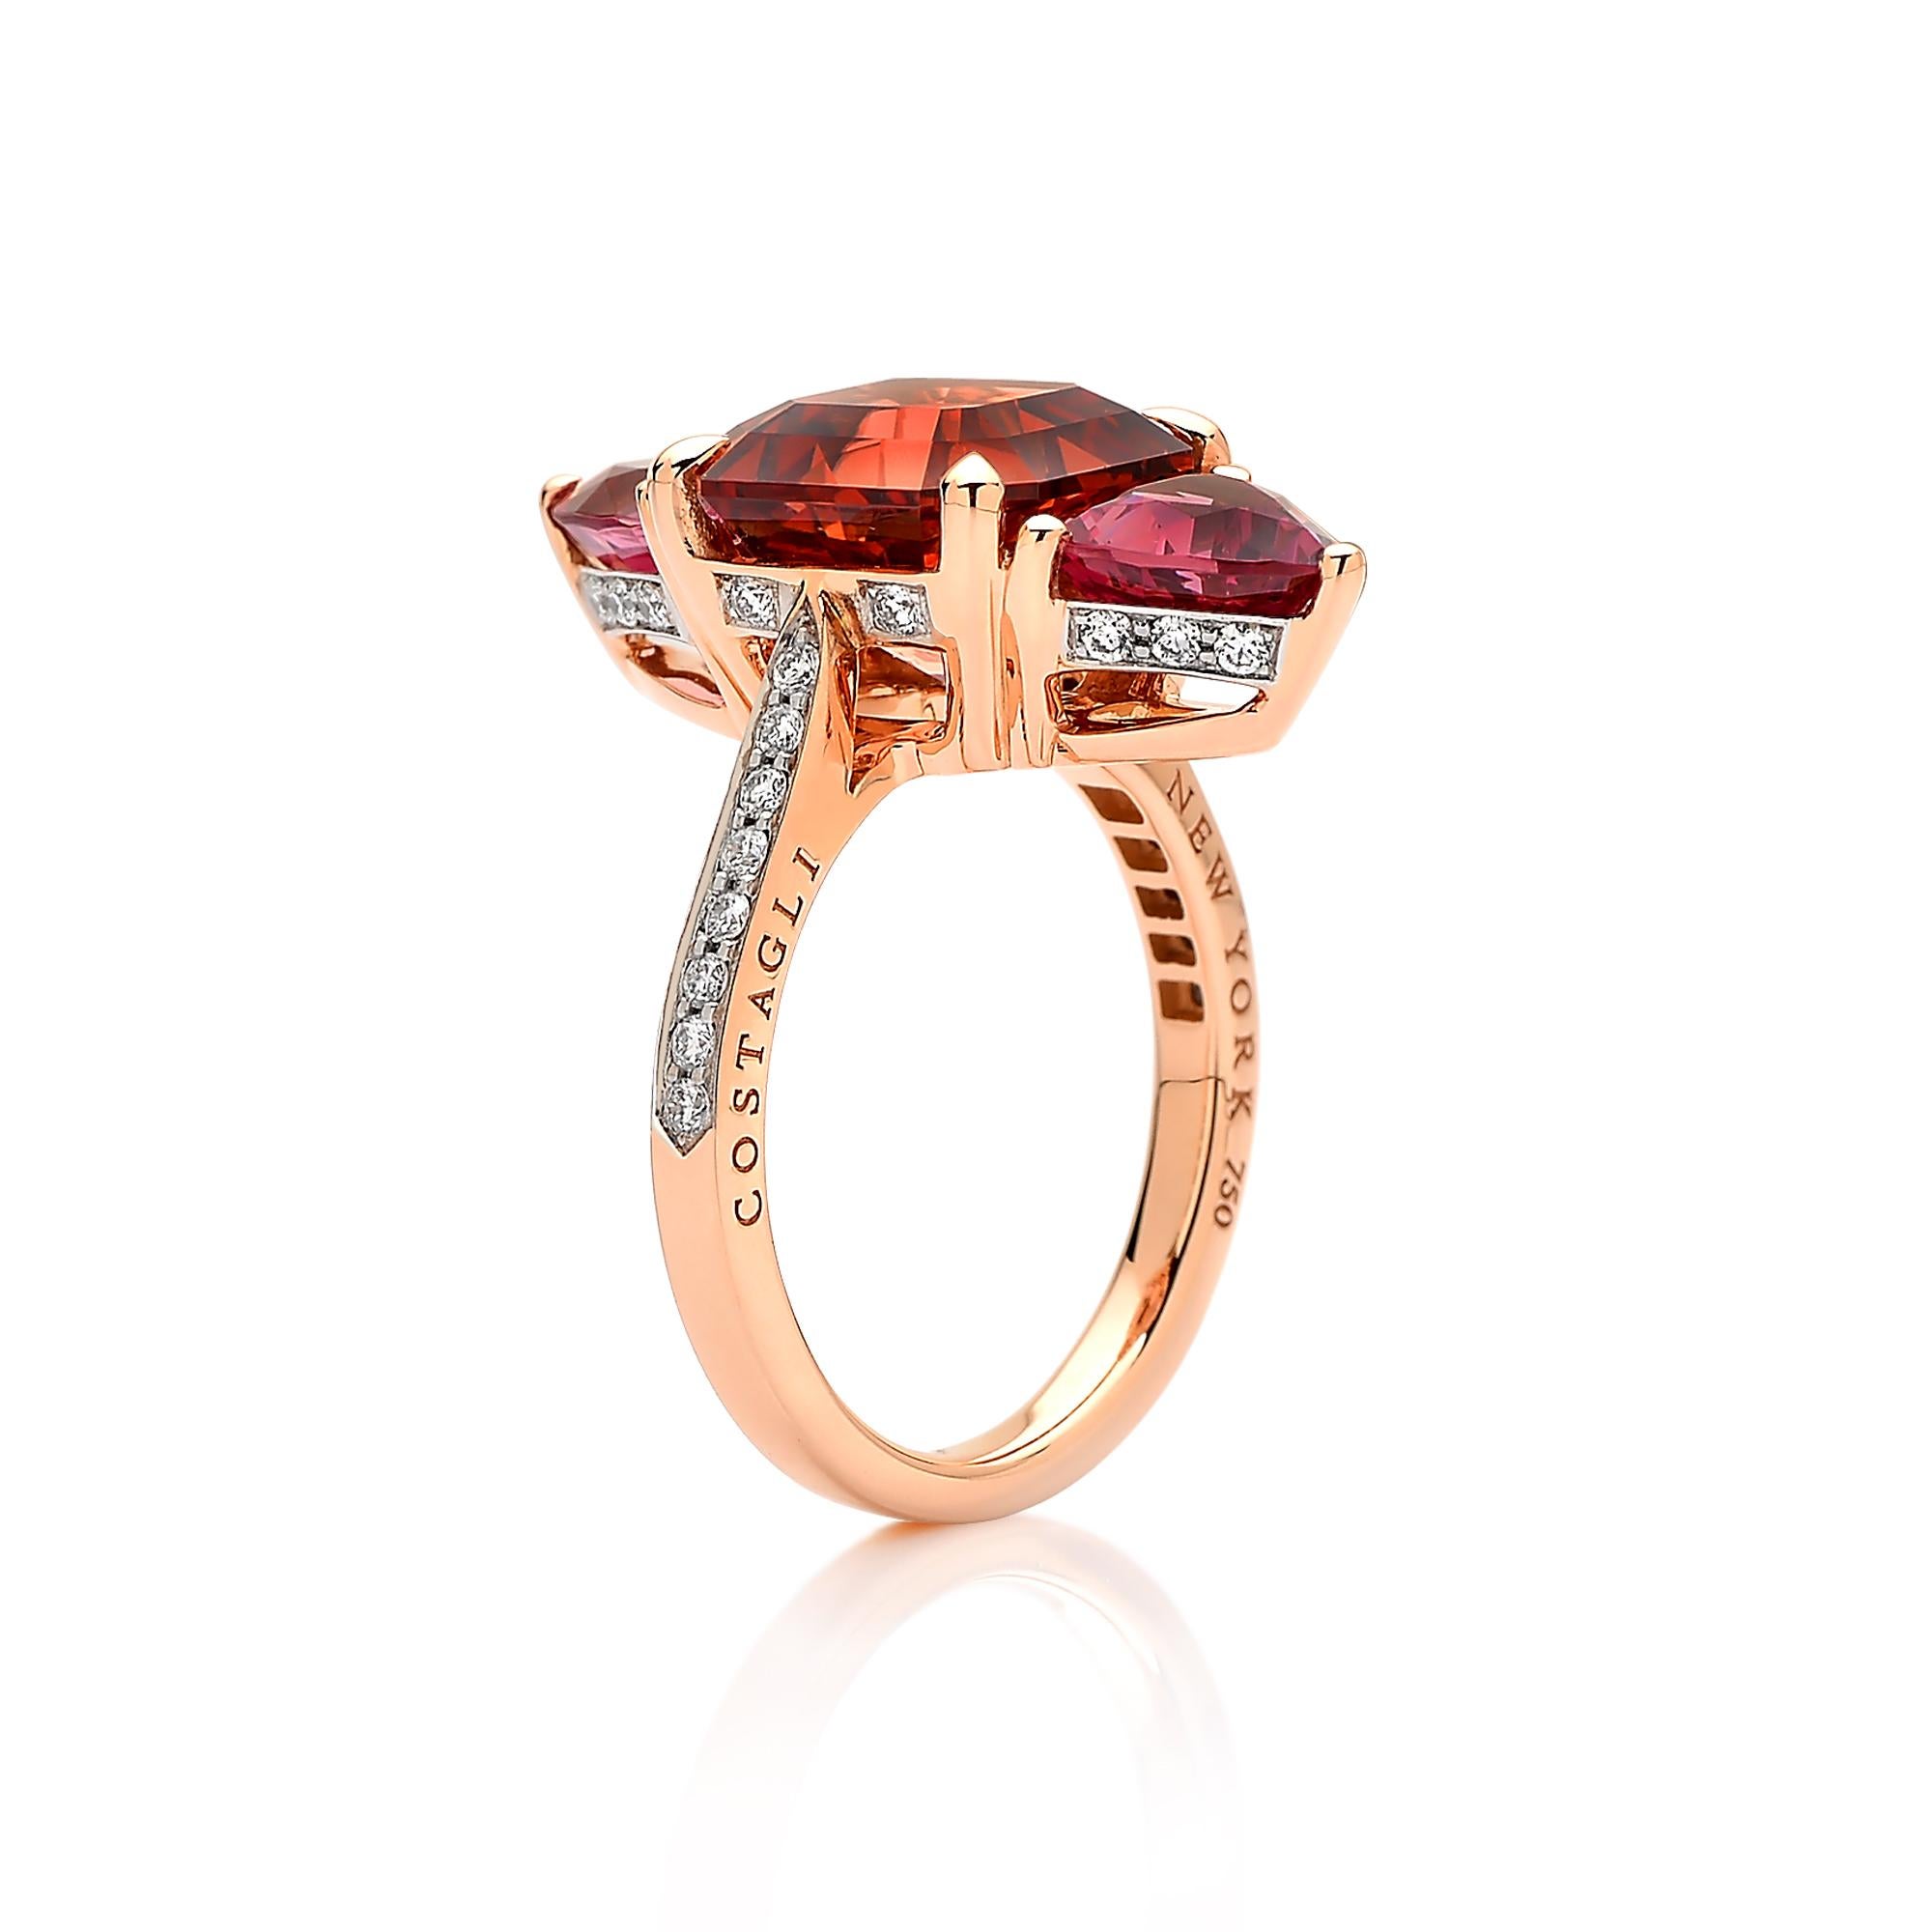 One of a kind emerald cut Mahenge Malaya Garnet ring flanked by trillion shape Malaya Garnets set in 18kt rose gold with pave-set round, brilliant diamond detailing.

This ring features a bold and modern silhouette of the exquisitely cut garnet